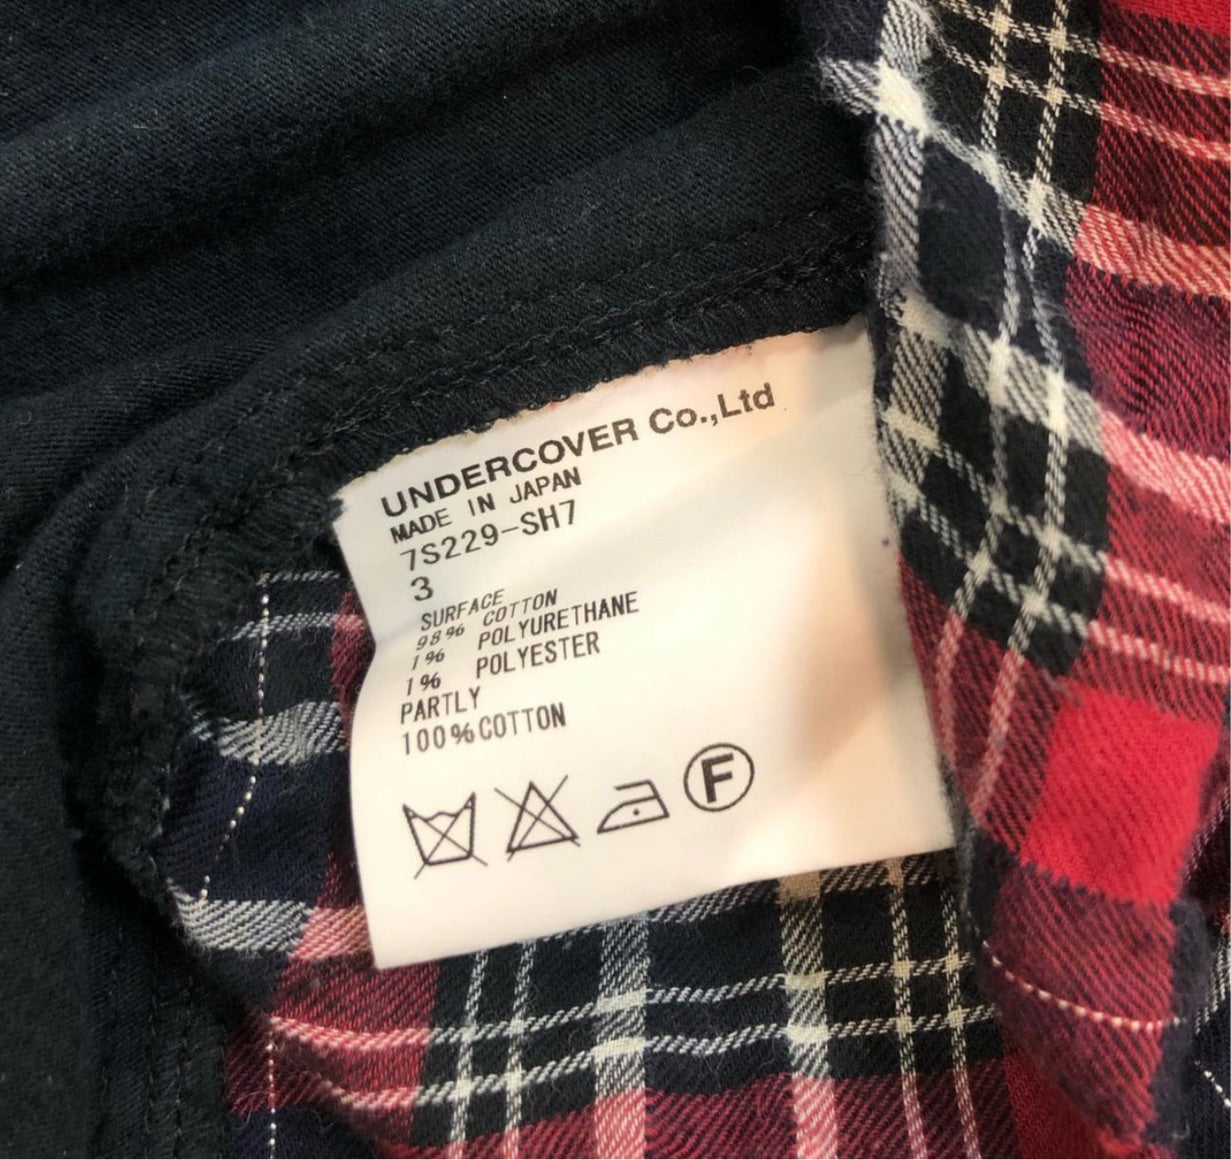 SS06 Undercover "The Last Scream Of Zamiang" Flannel Shirt